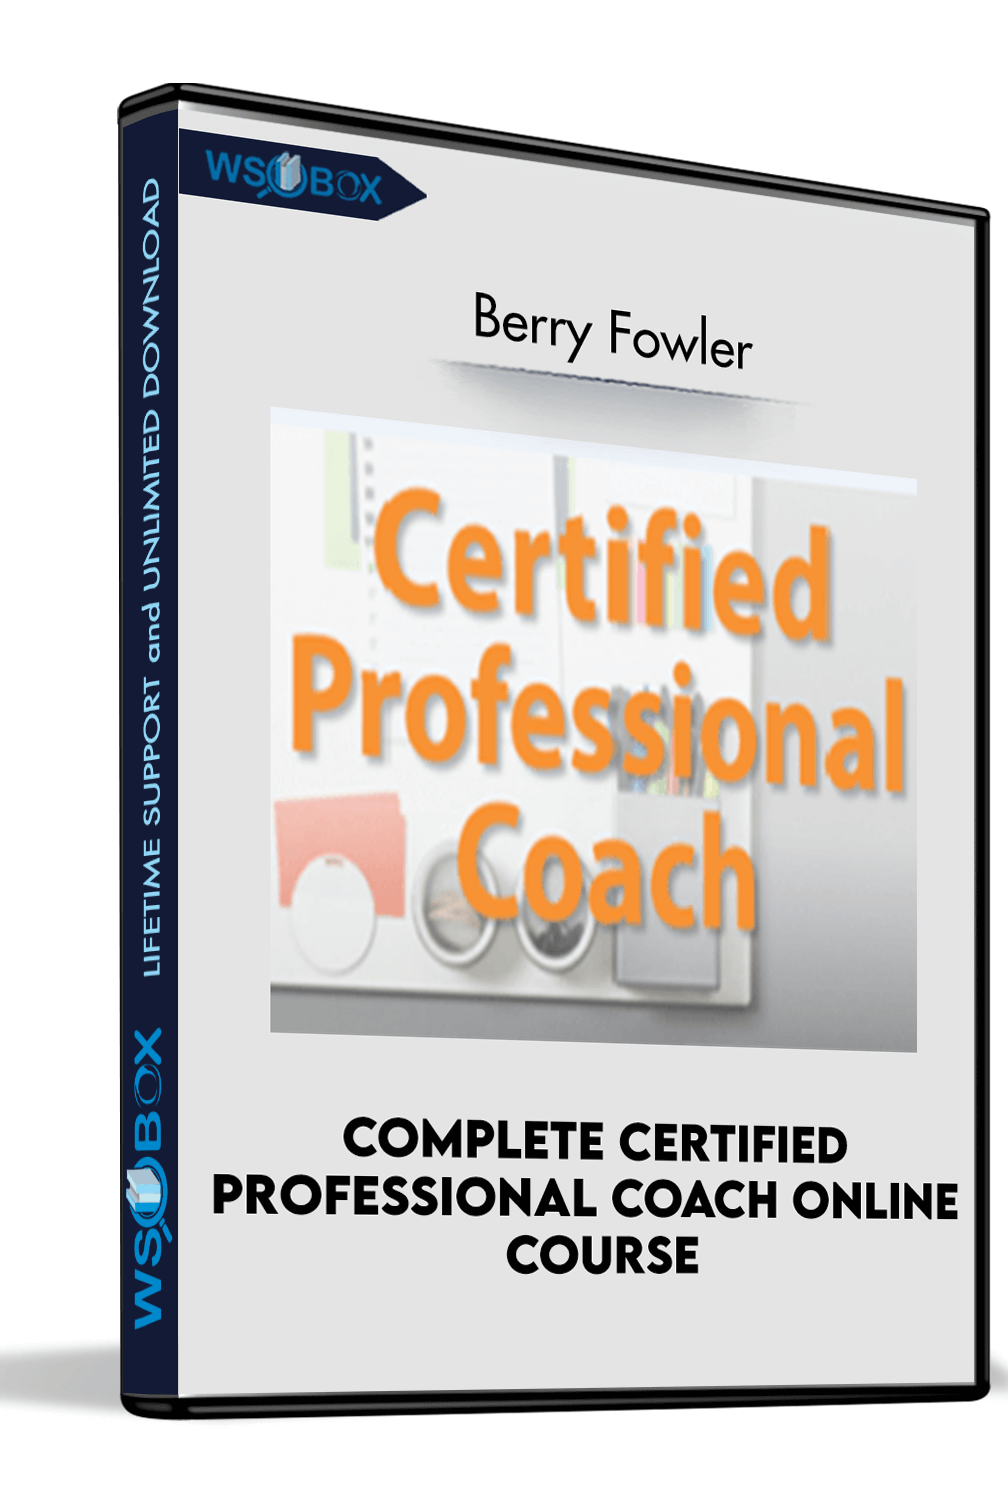 complete-certified-professional-coach-online-course-berry-fowler